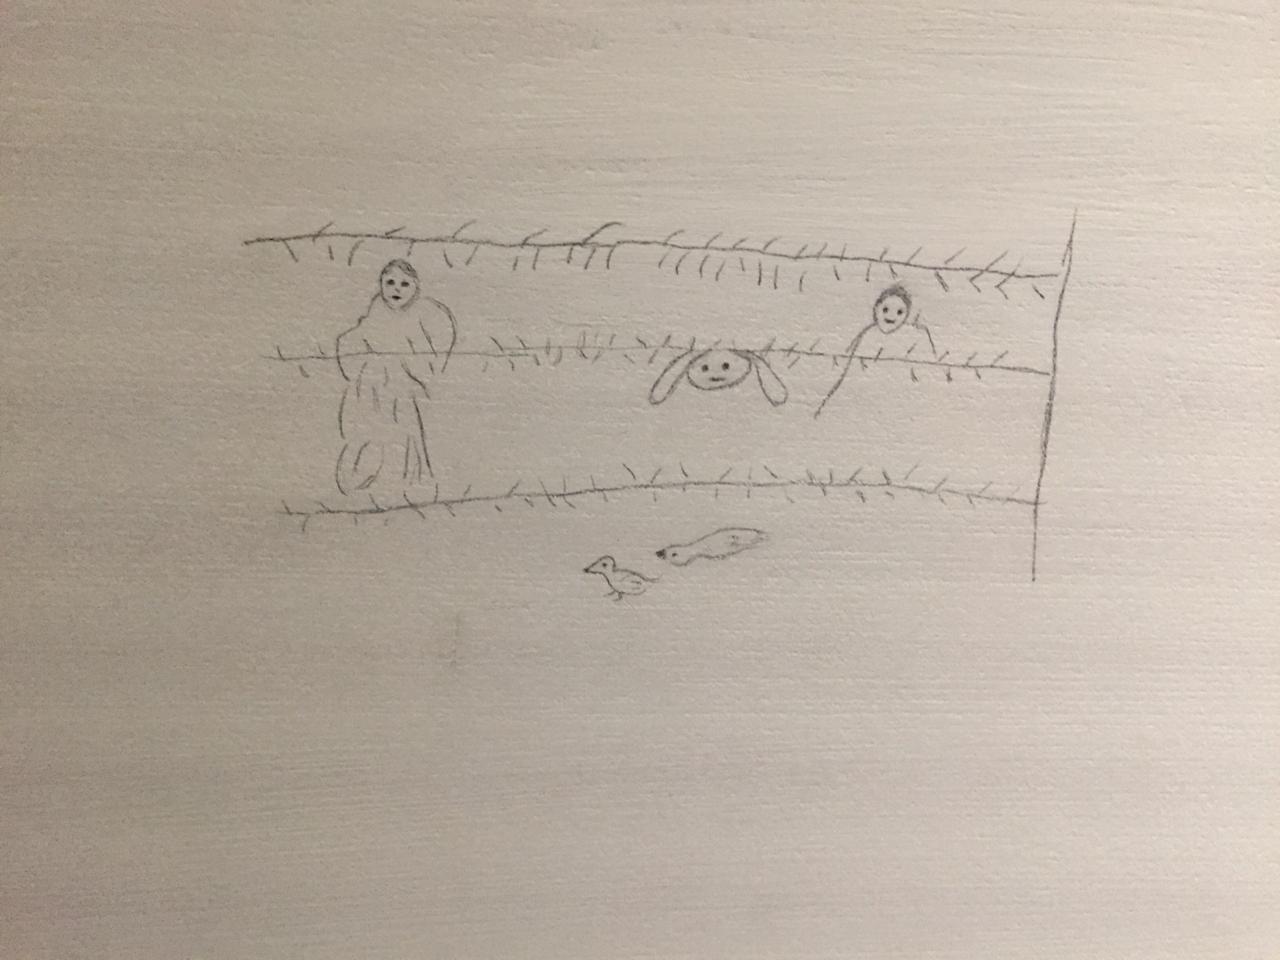 drawings from children in the camps